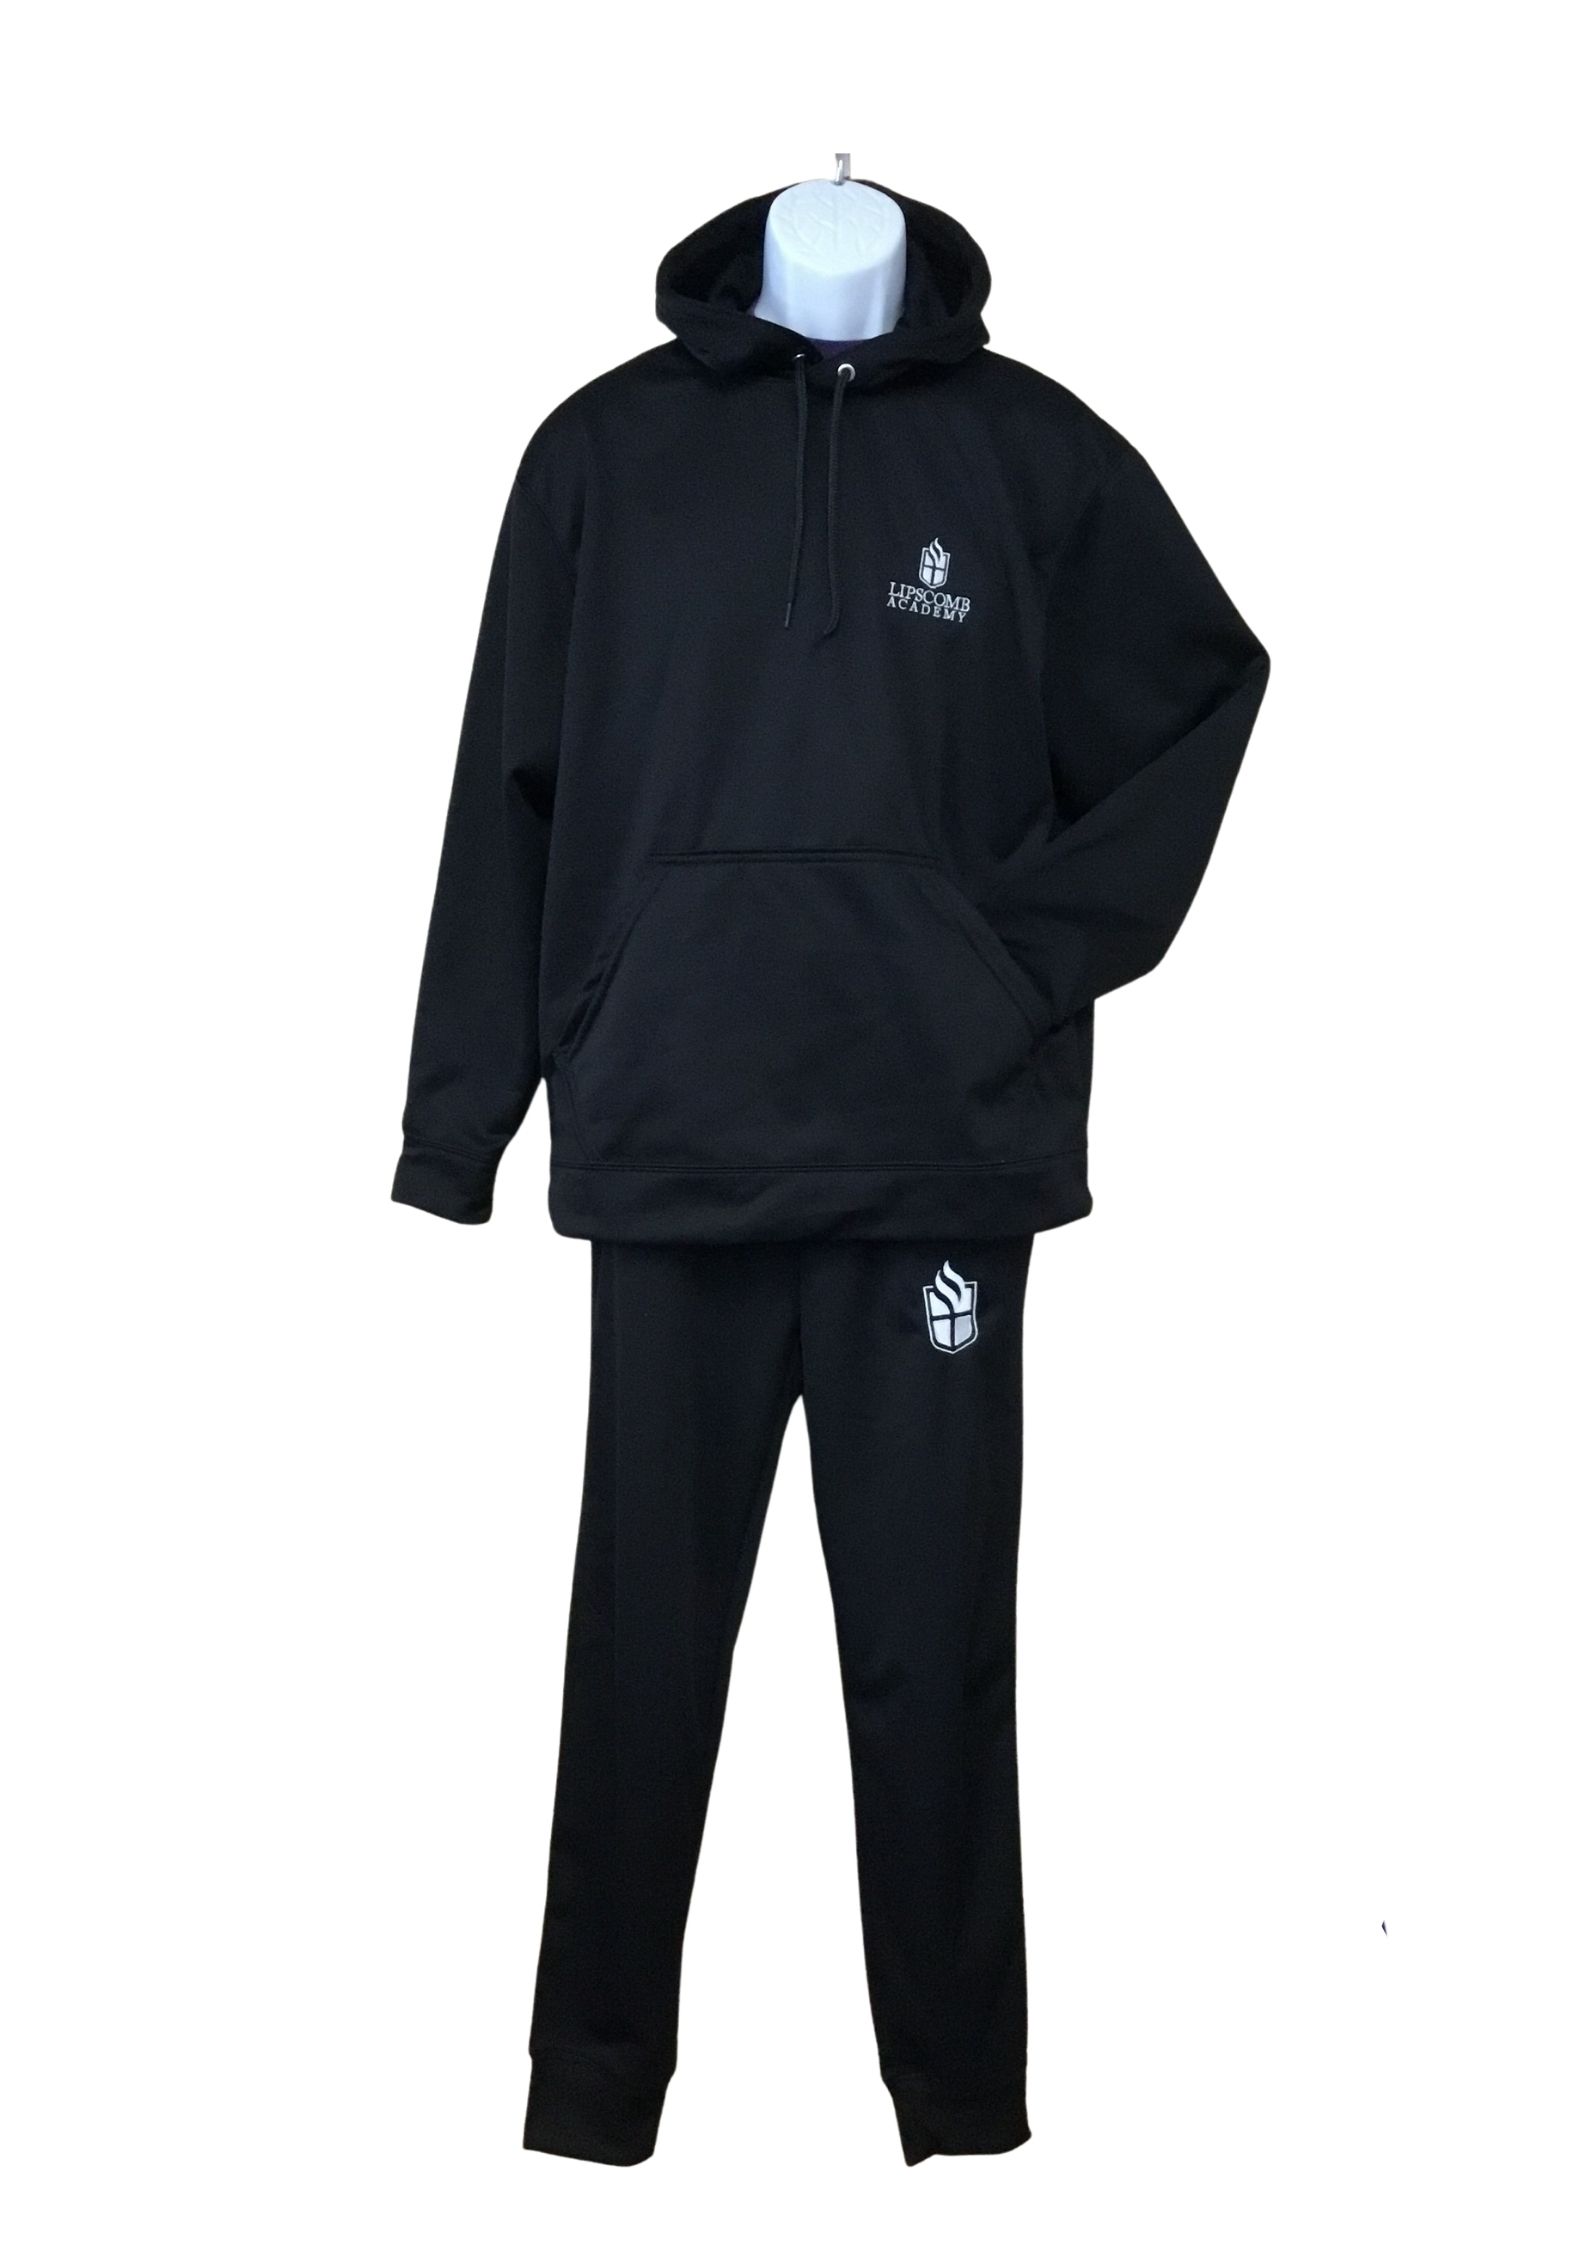 Uniform Sweatsuit For Senior Class Only & Worn Monday - Thursday only as a sweatsuit